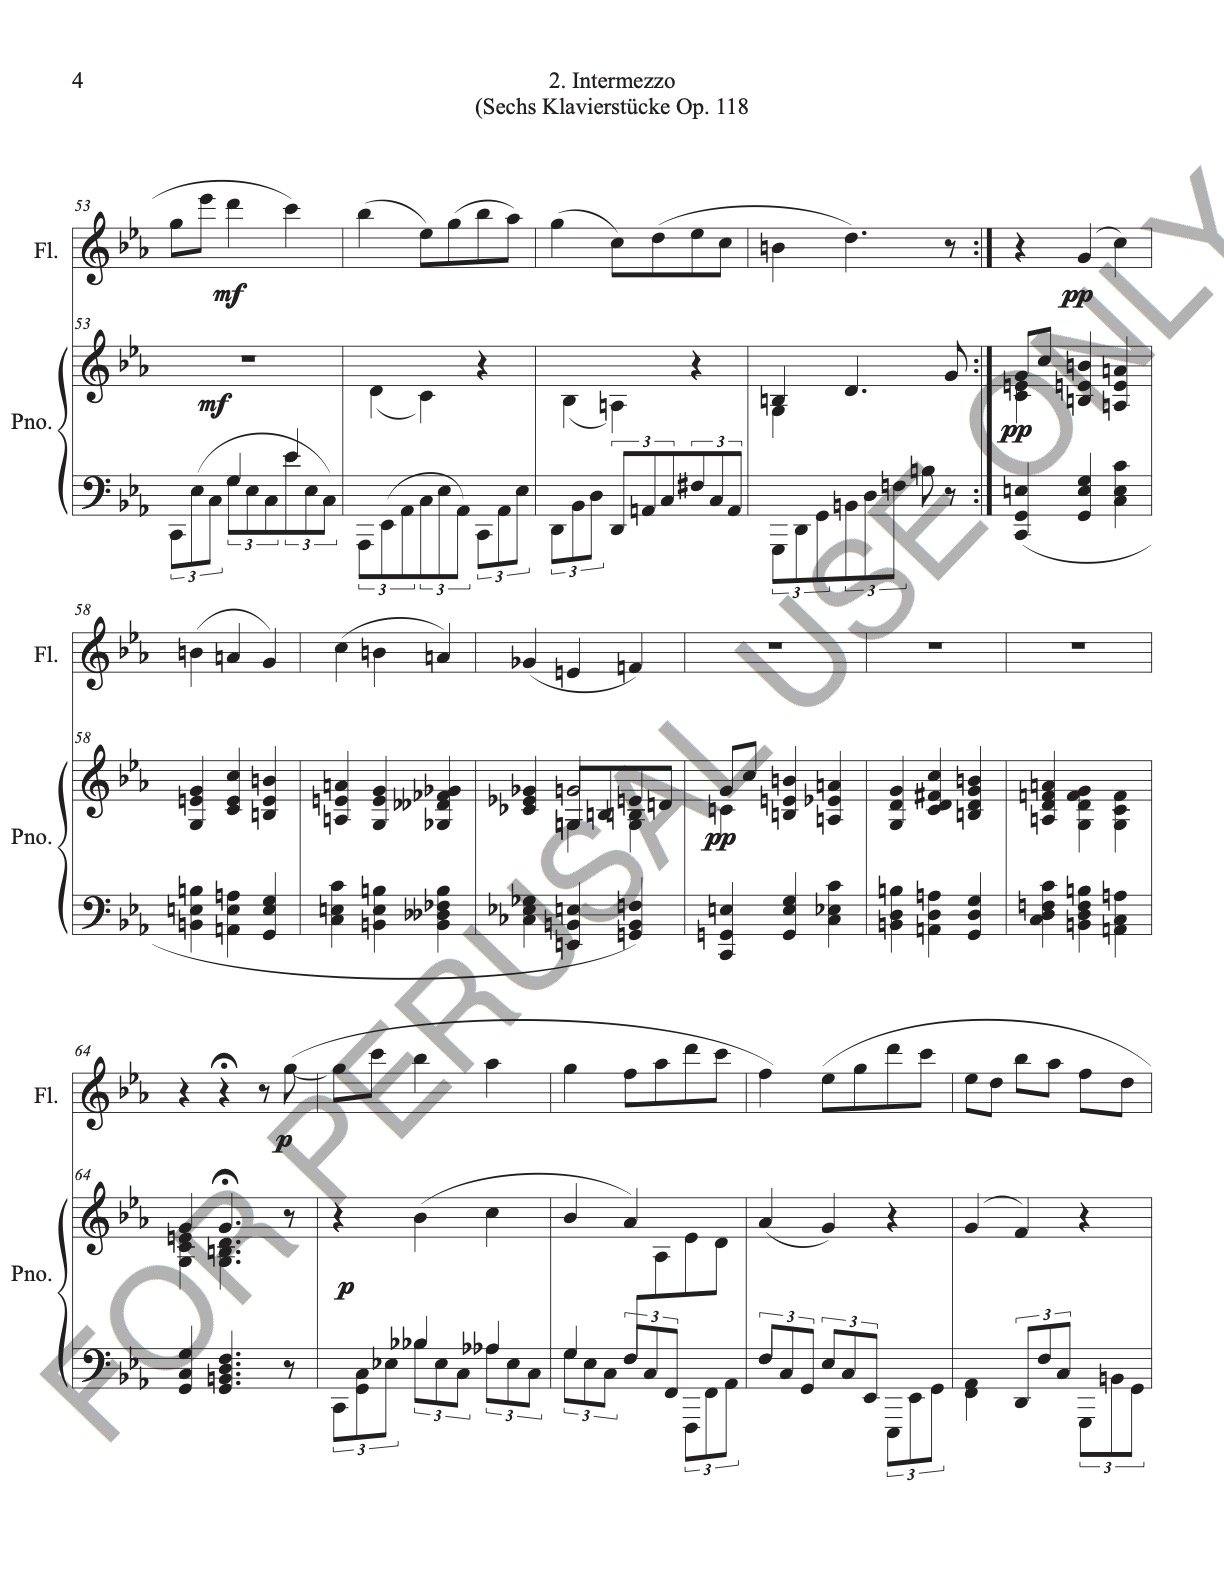 Intermezzo Op. 118 no. 2 by Brahms sheet music for Flute and Piano (score+parts) - ChaipruckMekara